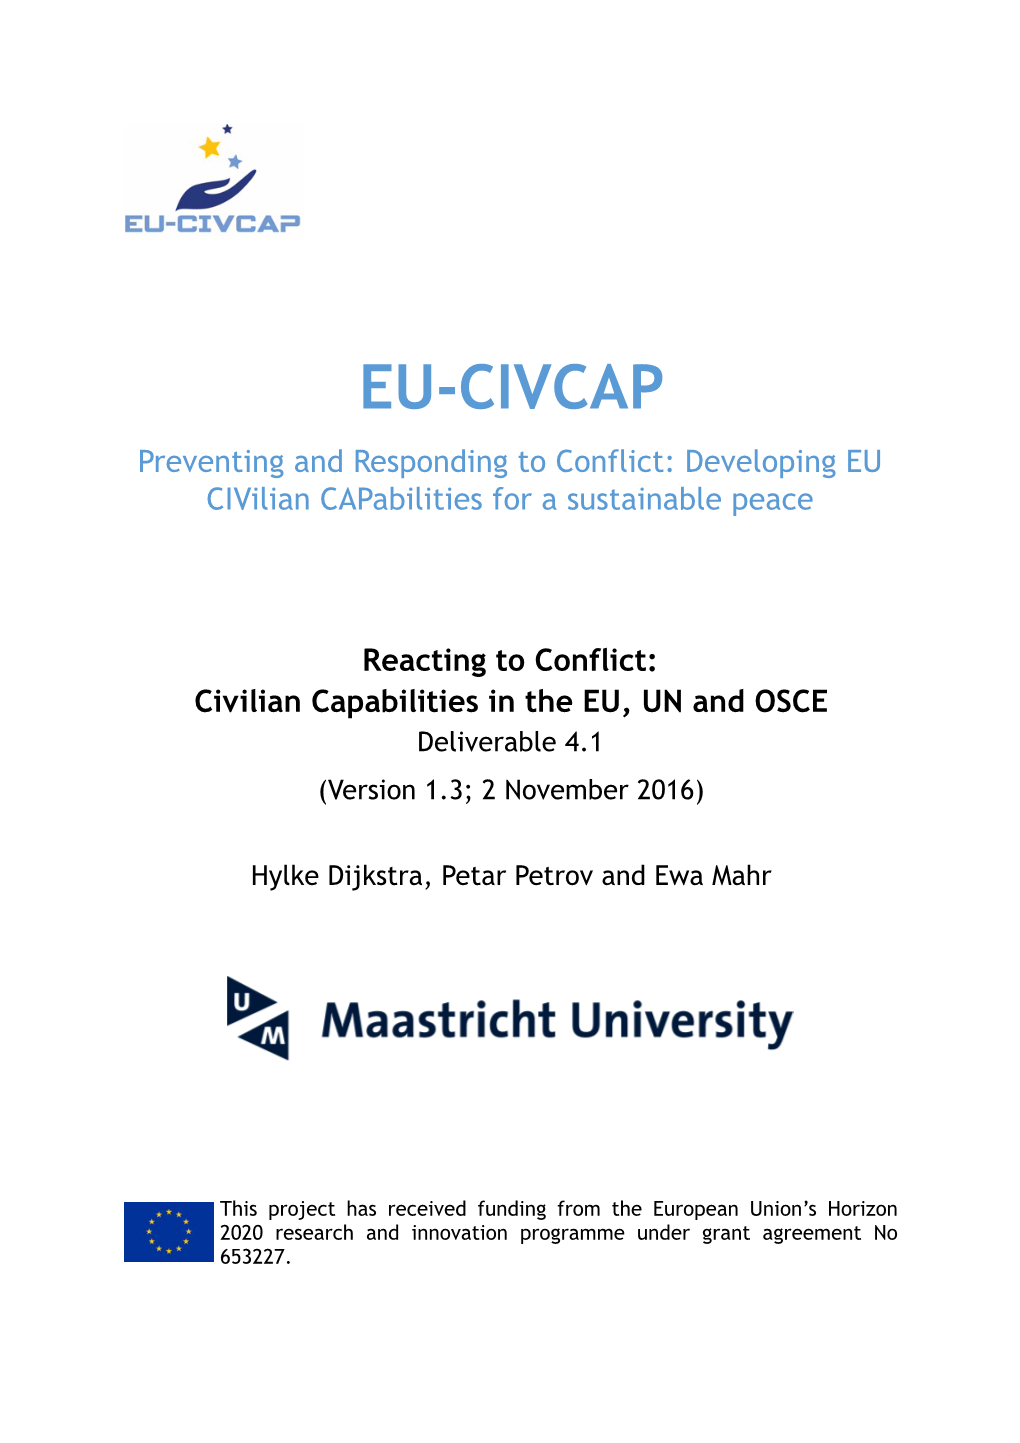 Reacting to Conflict: Civilian Capabilities in the EU, UN and OSCE Deliverable 4.1